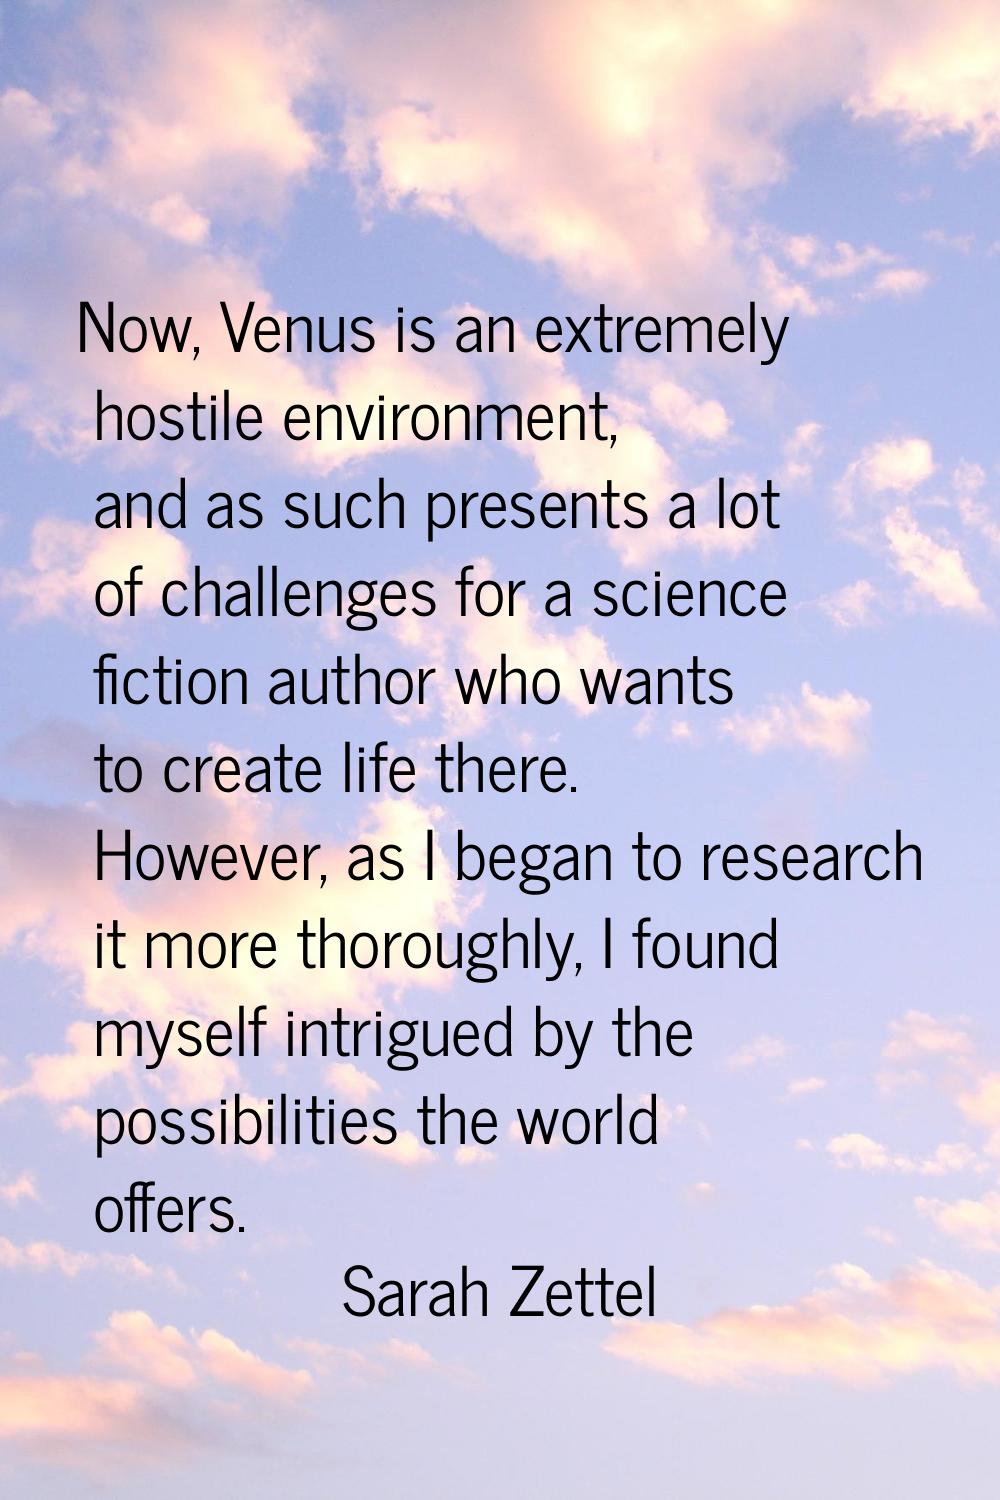 Now, Venus is an extremely hostile environment, and as such presents a lot of challenges for a scie